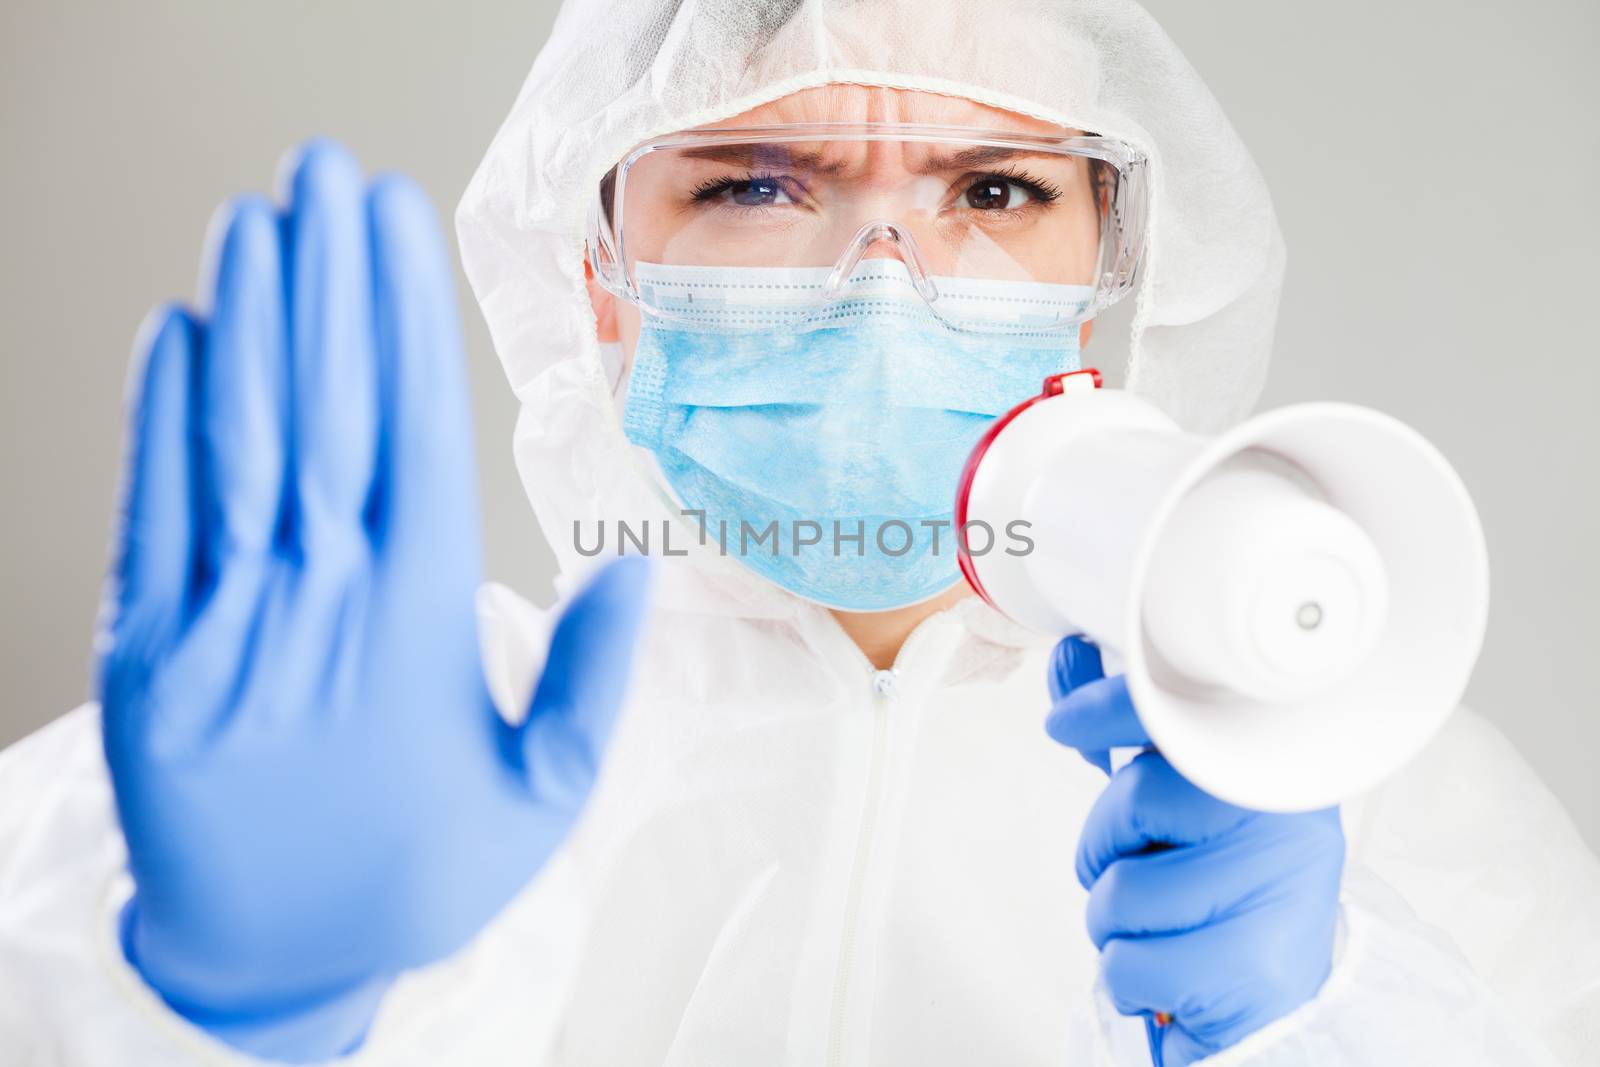 Doctor or medic in white protective suit, safety goggles, mask, gloves, holding a megaphone, shouting commands, raised arm with palm gesturing STOP, Coronavirus COVID-19 virus disease pandemic crisis